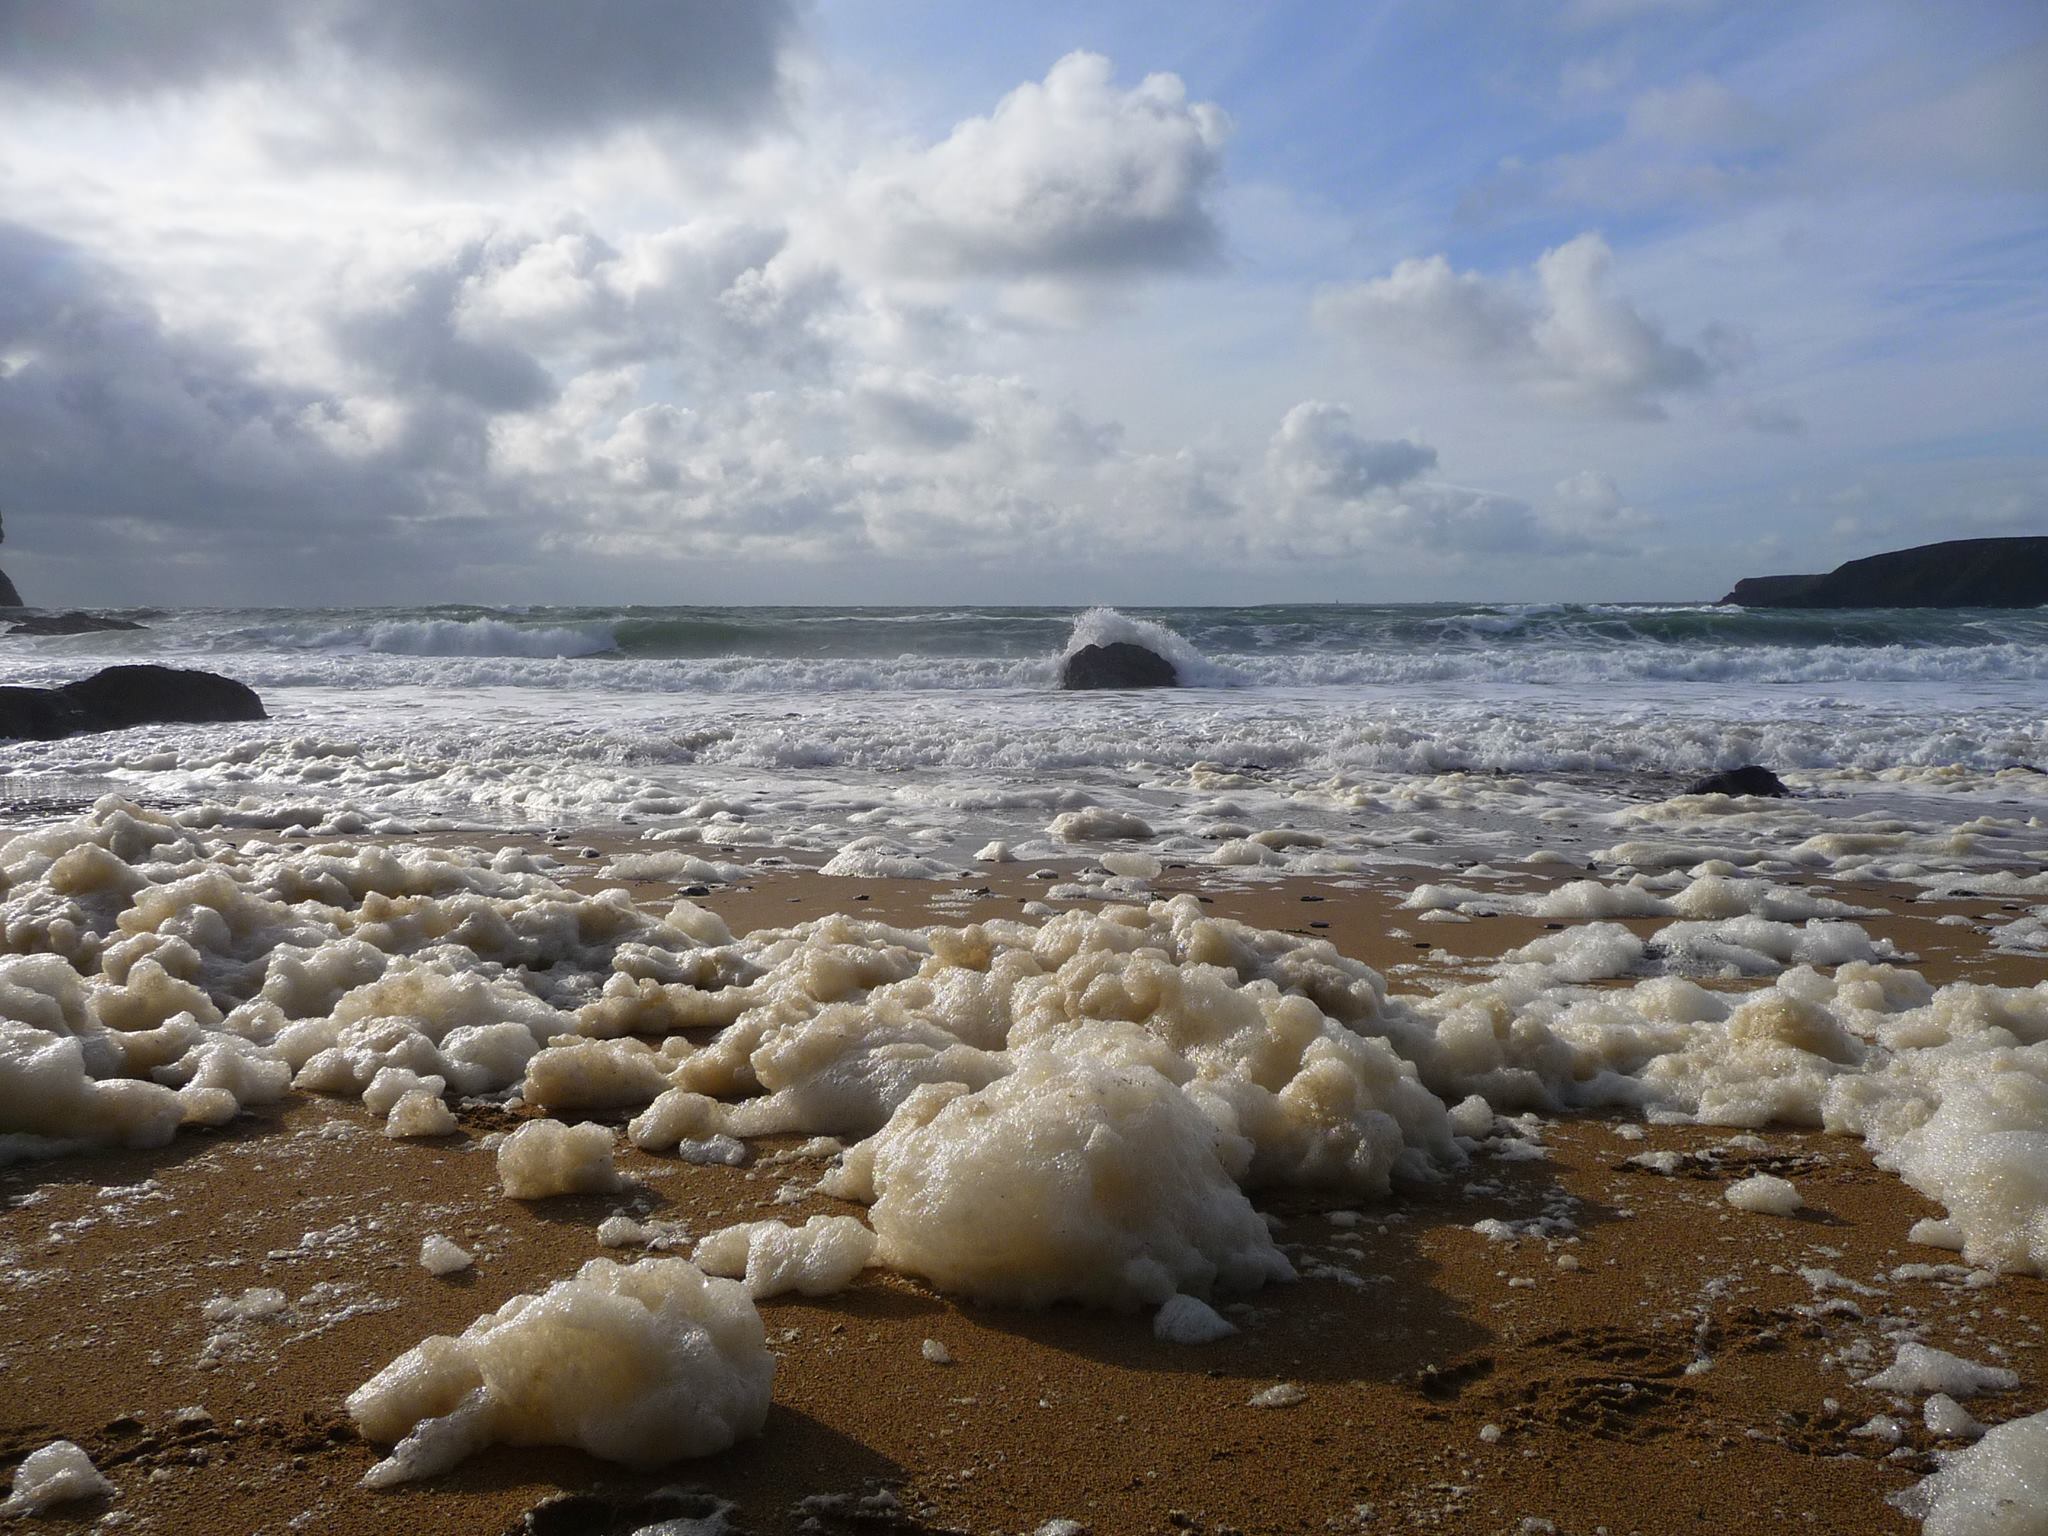 A collection of off white coloured foam on a sandy beach with waves in the background